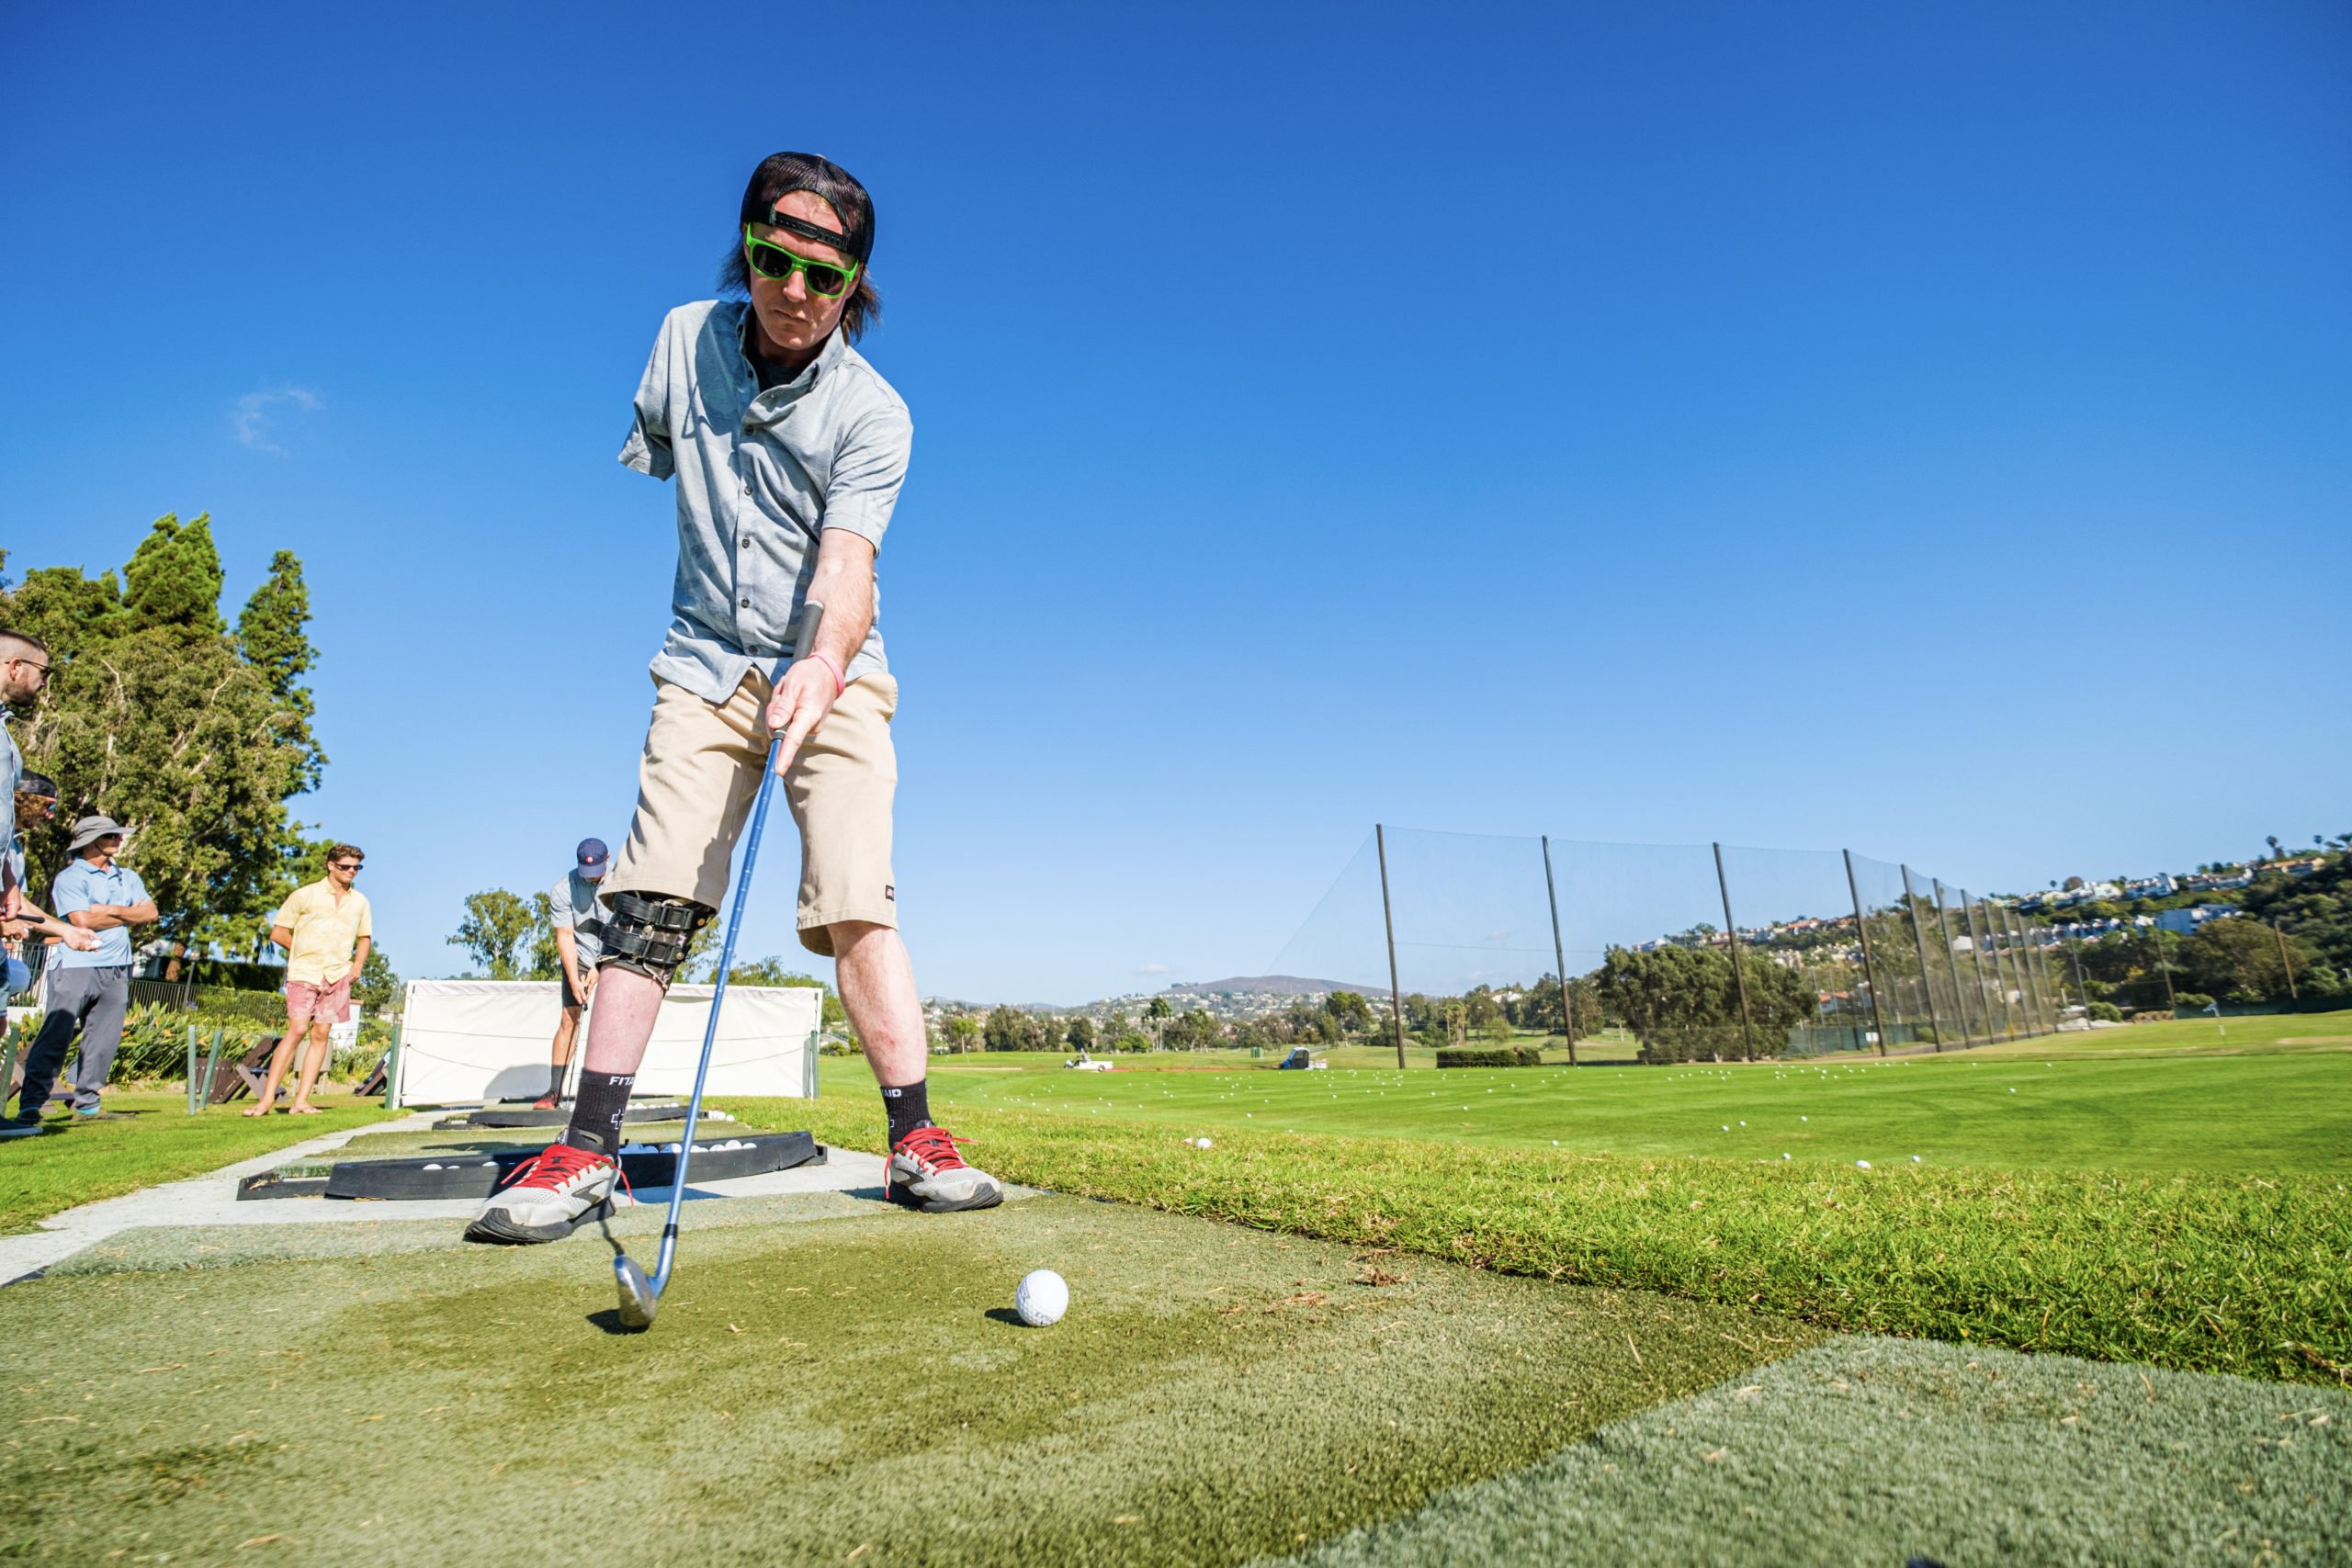 Shane learns how to adaptively golf at the Forge retreat as an arm amputee and gets ready to swing the golf club at the driving range.